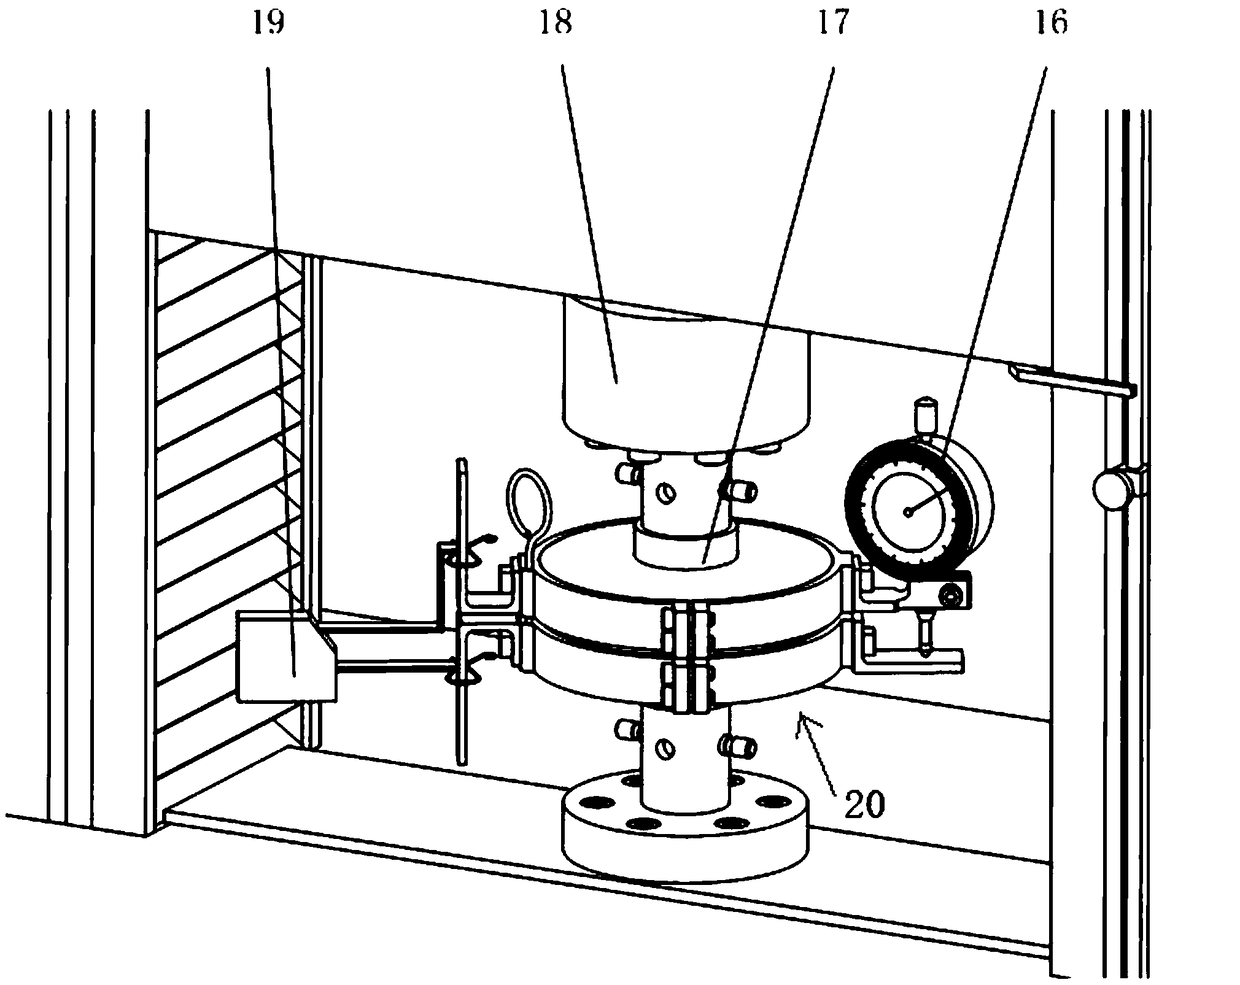 Auxiliary test tool and method for wave spring